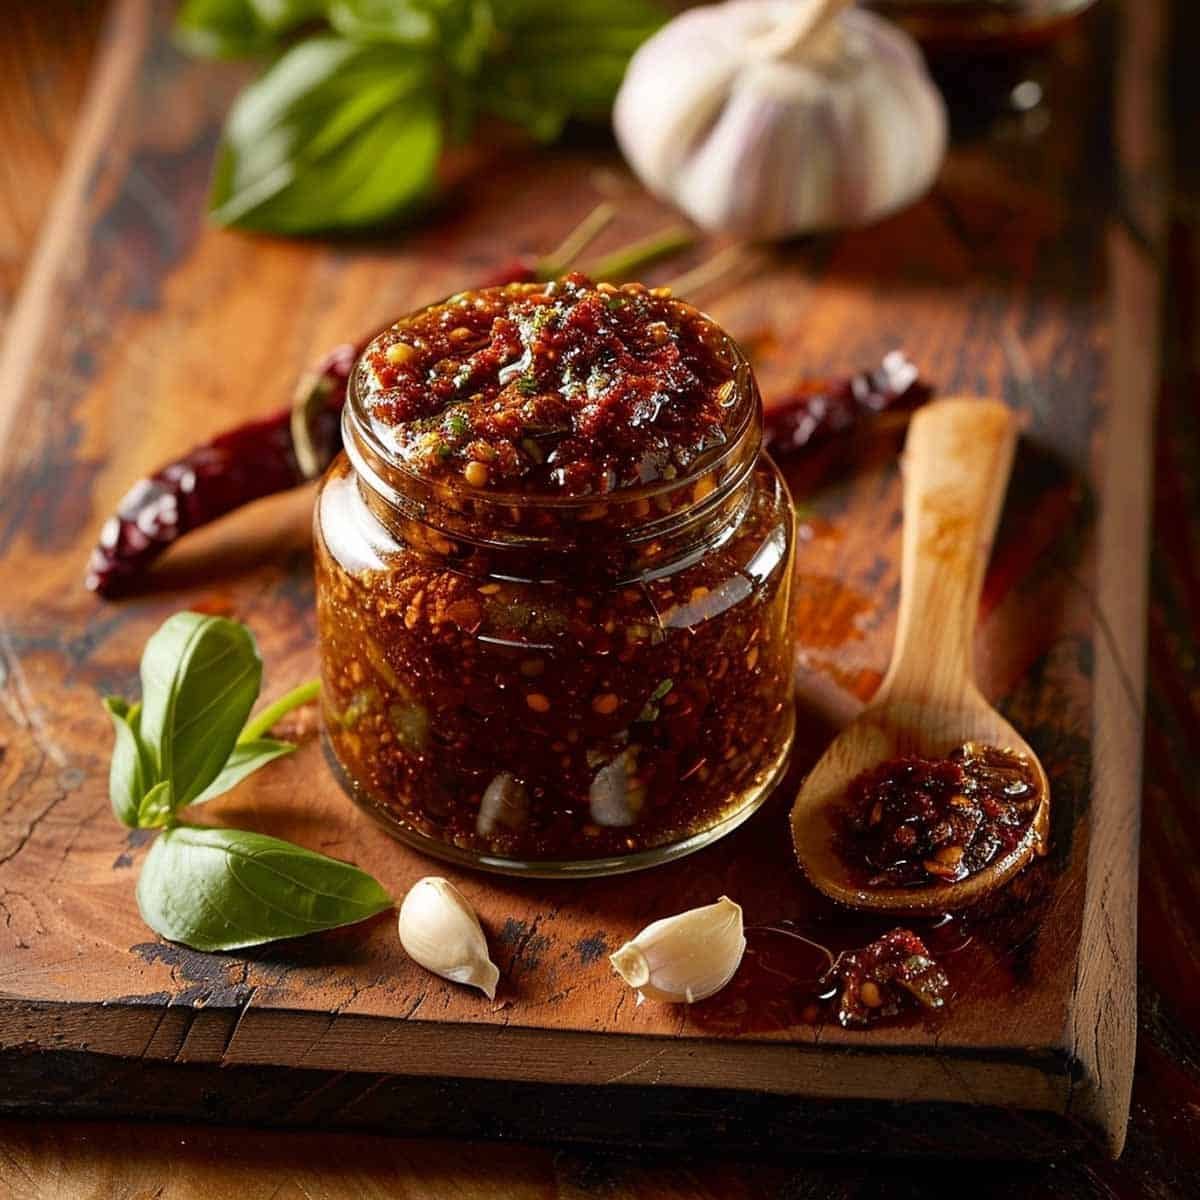 A rustic cutting board holds a jar of dark Nam Prik Pao and a stained wooden spoon, highlighting the paste’s rich texture and homemade appeal.